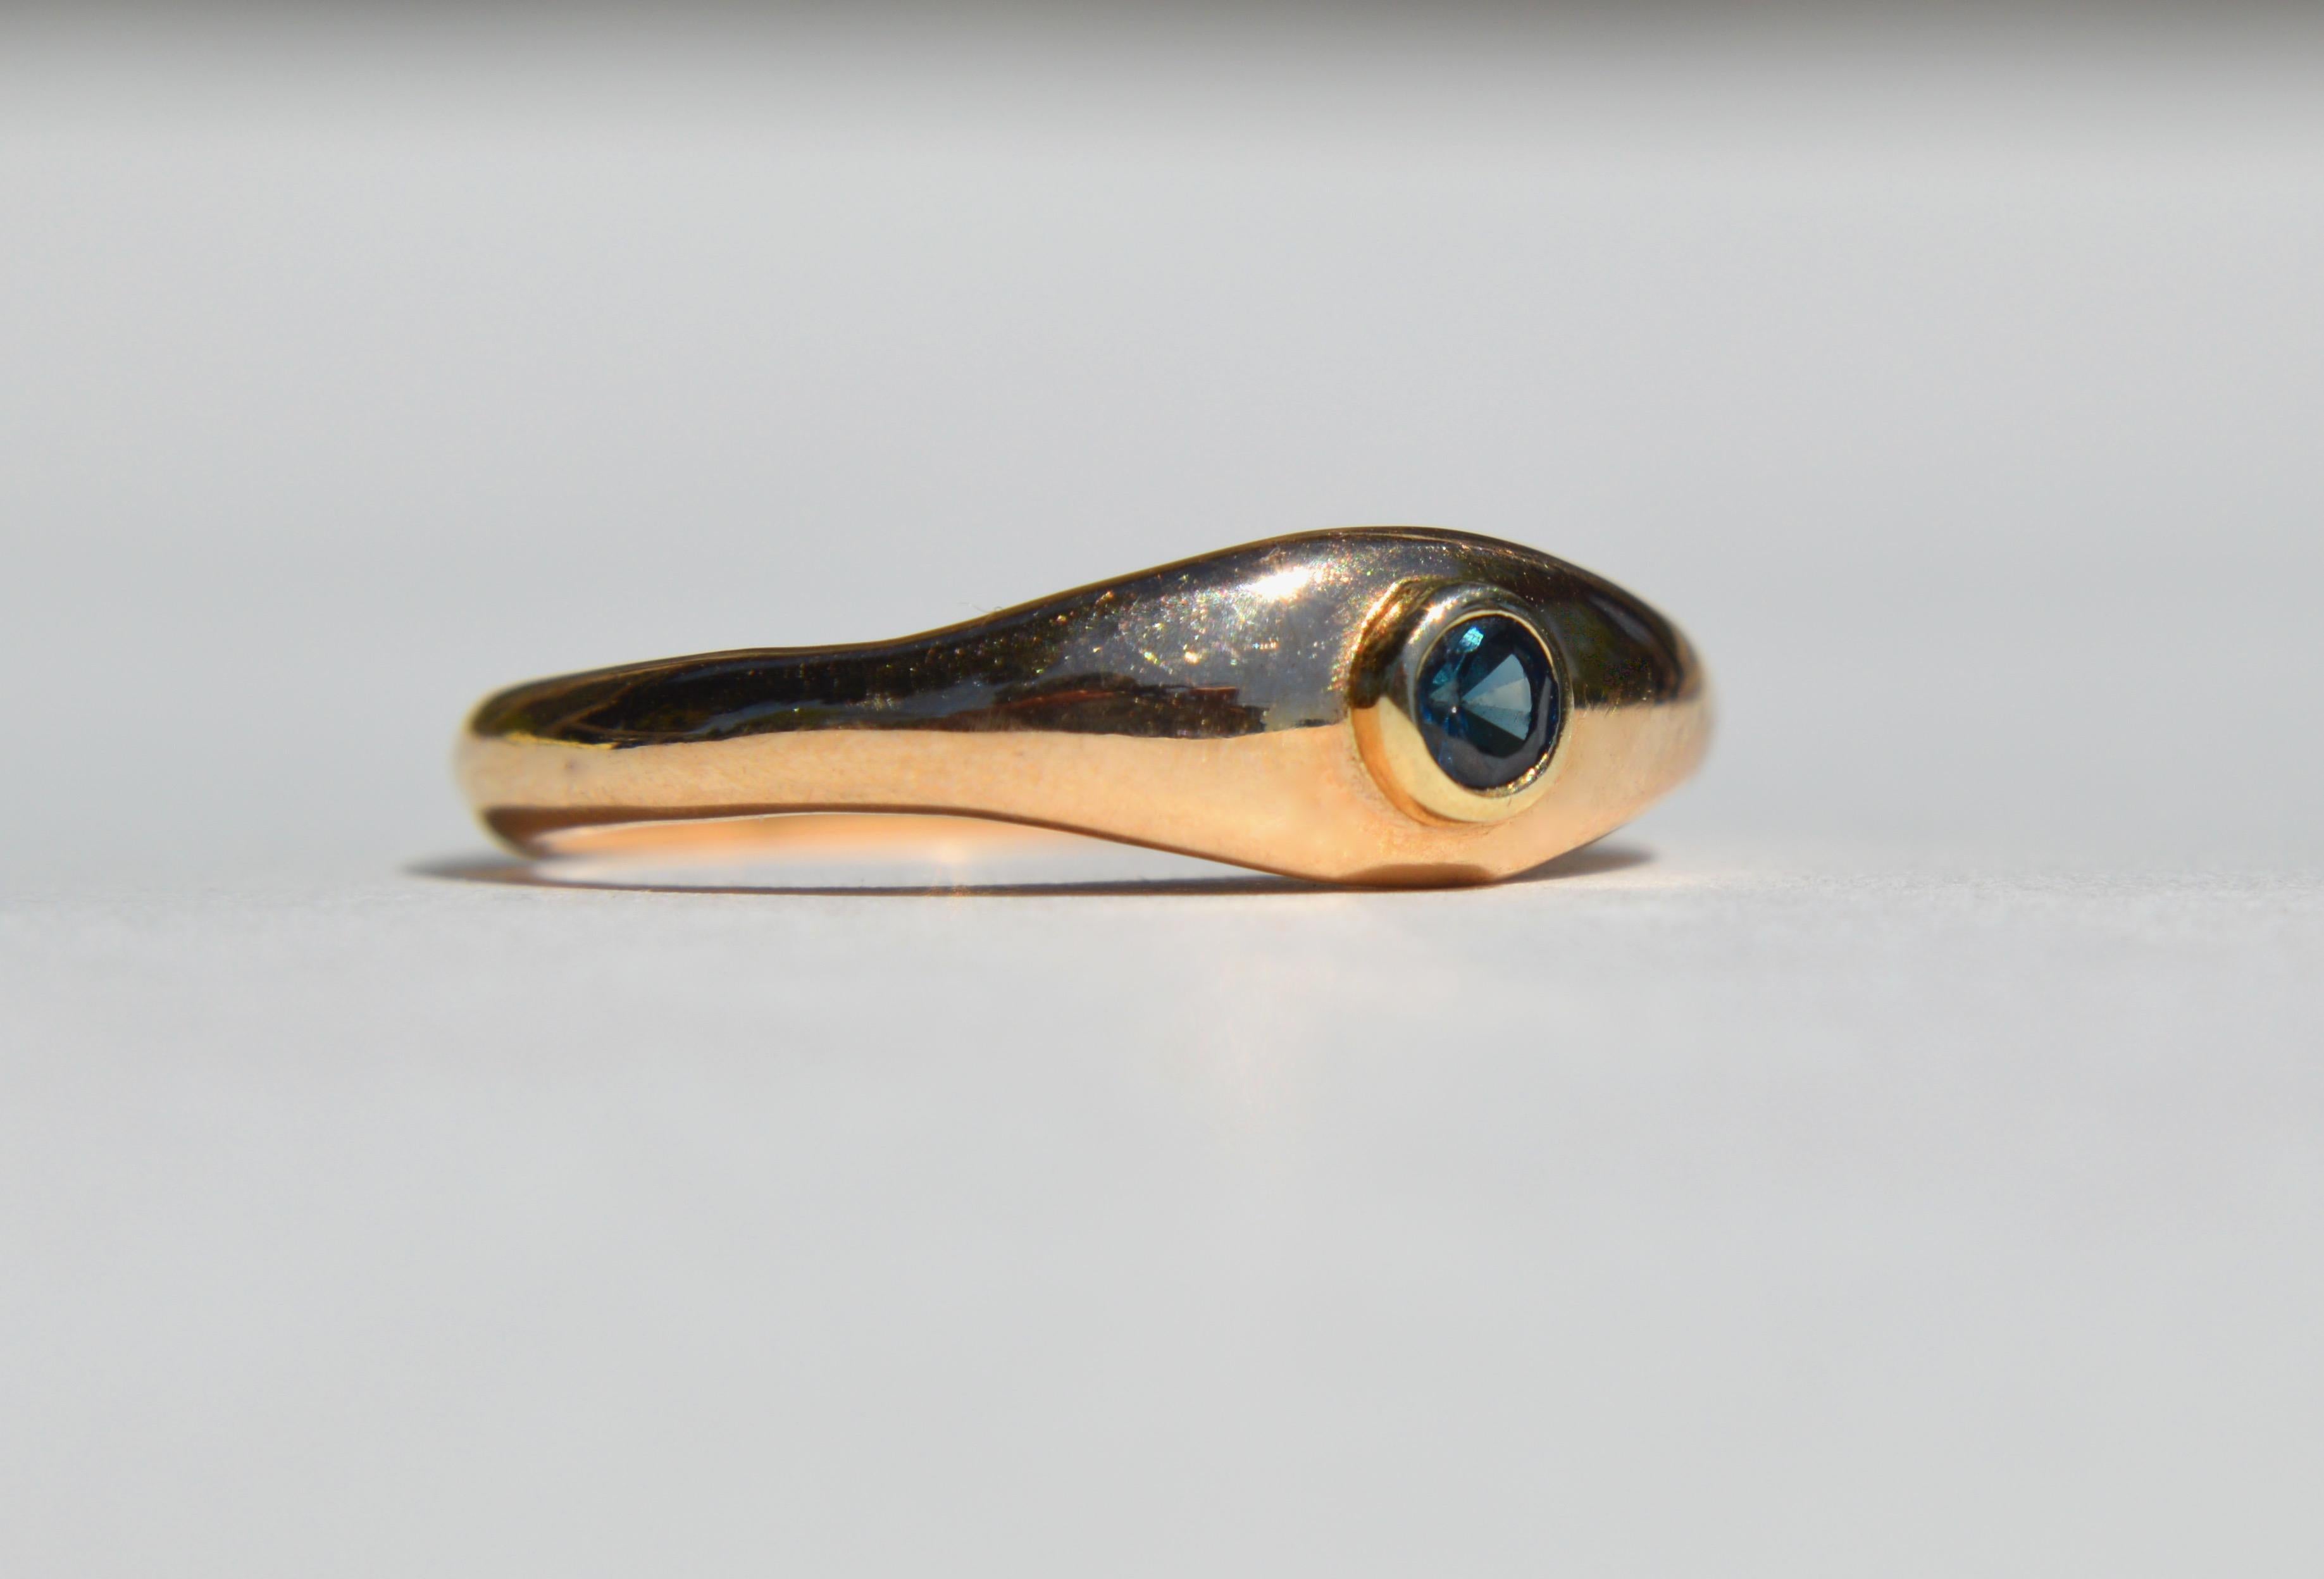 Beautiful Midcentury era circa 1960s .11 carat natural deep blue Ceylon sapphire and diamond ring in solid 14K yellow gold with a bezel setting. Gold is unmarked, but tested as solid 14K gold. Size 6.25 and resizable. Sapphire measures 3mm in